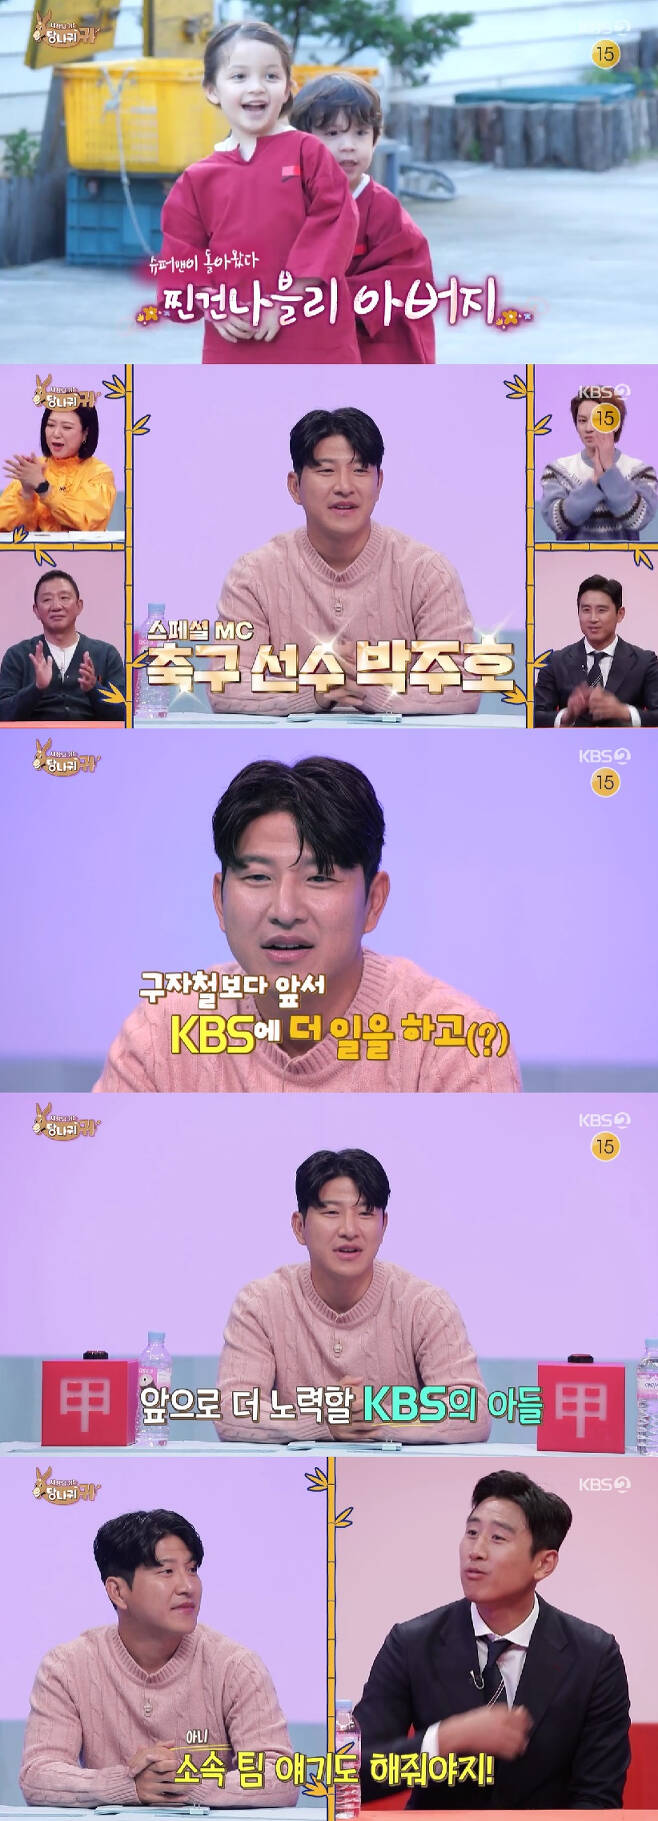 Park Joo-ho, a soccer player from Suwon FC, appeared on KBS 2TV entertainment program Boss in the Mirror on the afternoon of the 20th.On this day, Park Joo-ho sniped his colleague Koo Ja-Cheol and introduced himself as Park Joo-ho, a soccer player who is a KBS son who will work at KBS ahead of (former) Ja-cheol and make more efforts in the future.Koo Ja-Cheol pointed out, Do not you have to tell your team? And other panelists also pinched Park Joo-hos ambition, saying, I thought it was a station employee.On the other hand, Park Joo-ho is married to his Swiss wife Anna and has two sons and two daughters. On this day, Anna received a lot of support from her instagram.